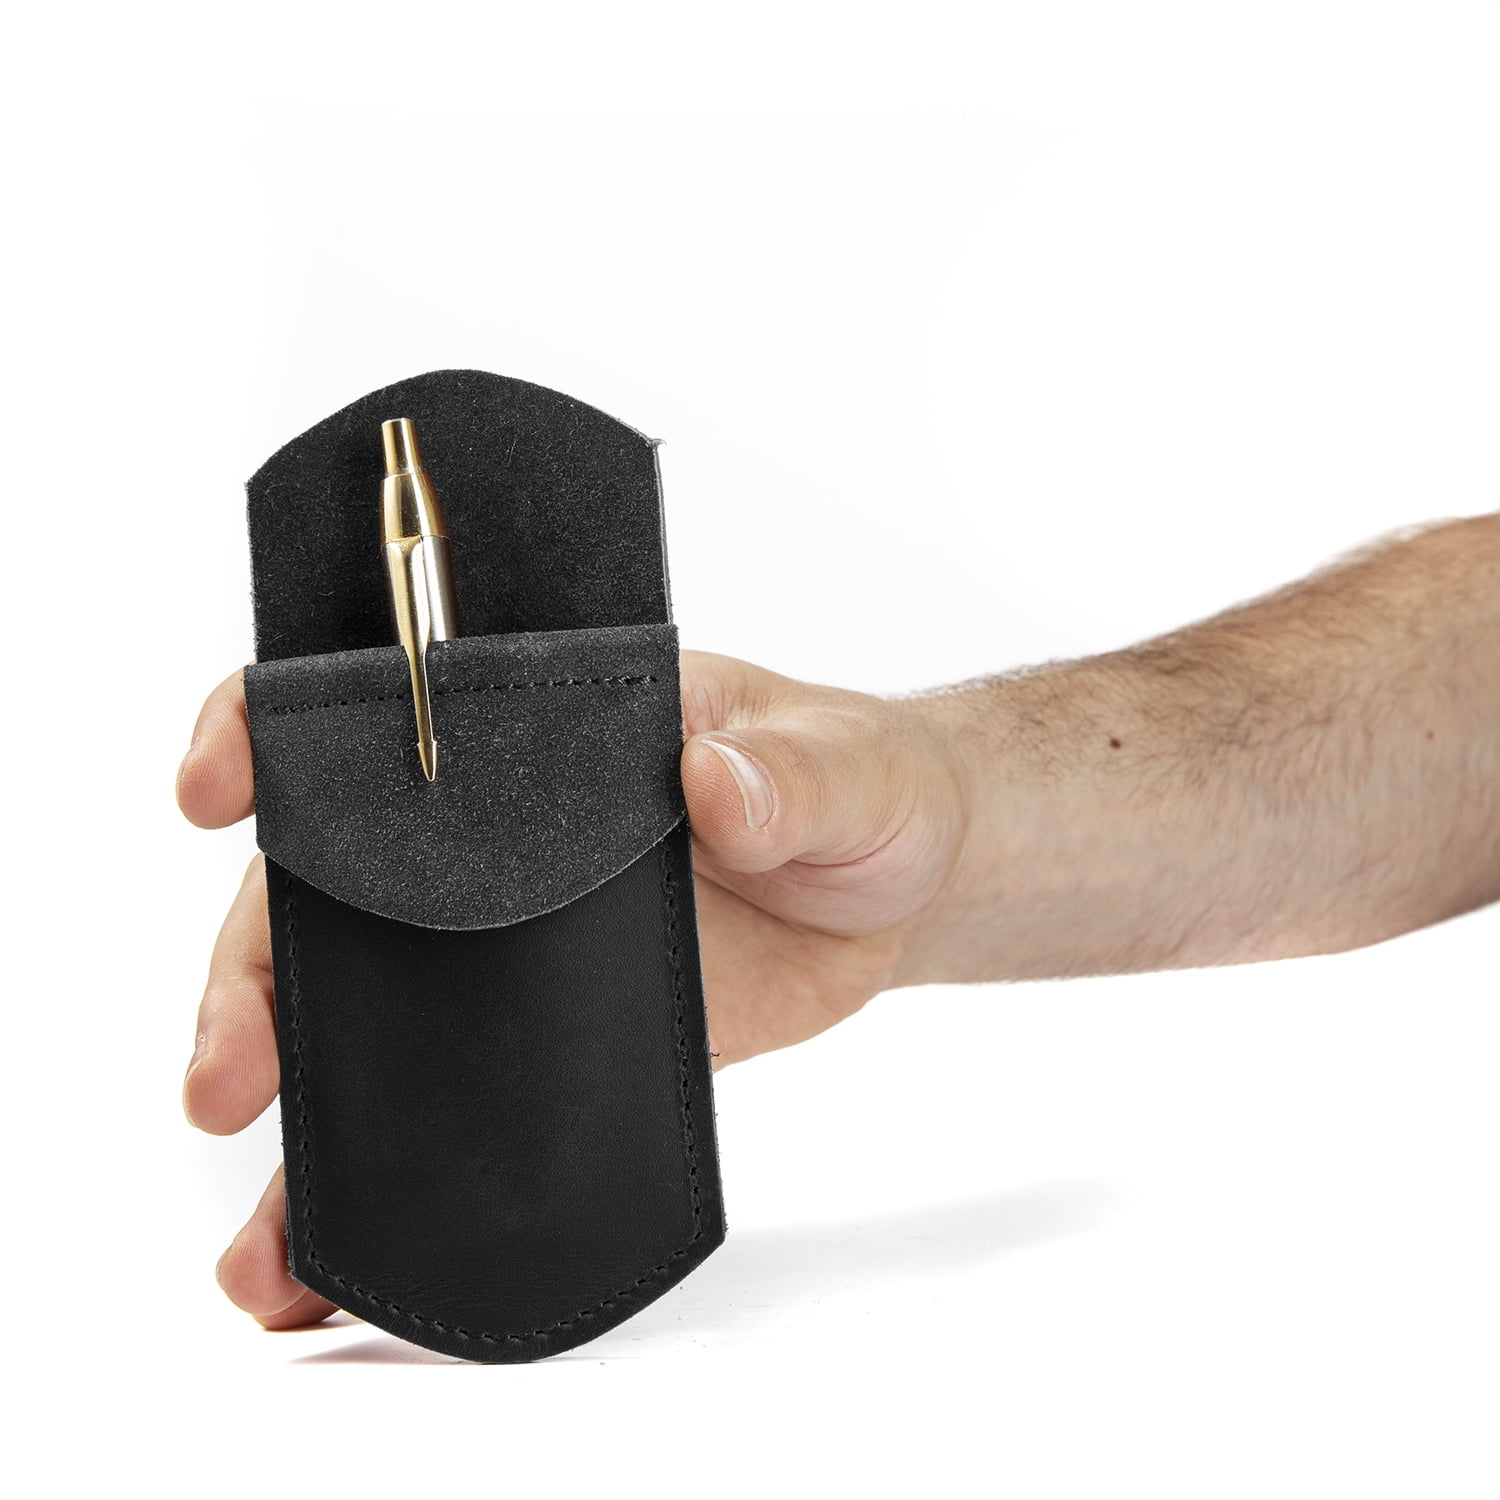 Hide & Drink Durable Leather Pocket Protector / Pencil Pouch / Office & Work Essentials Pen Holder :: Swayze Suede